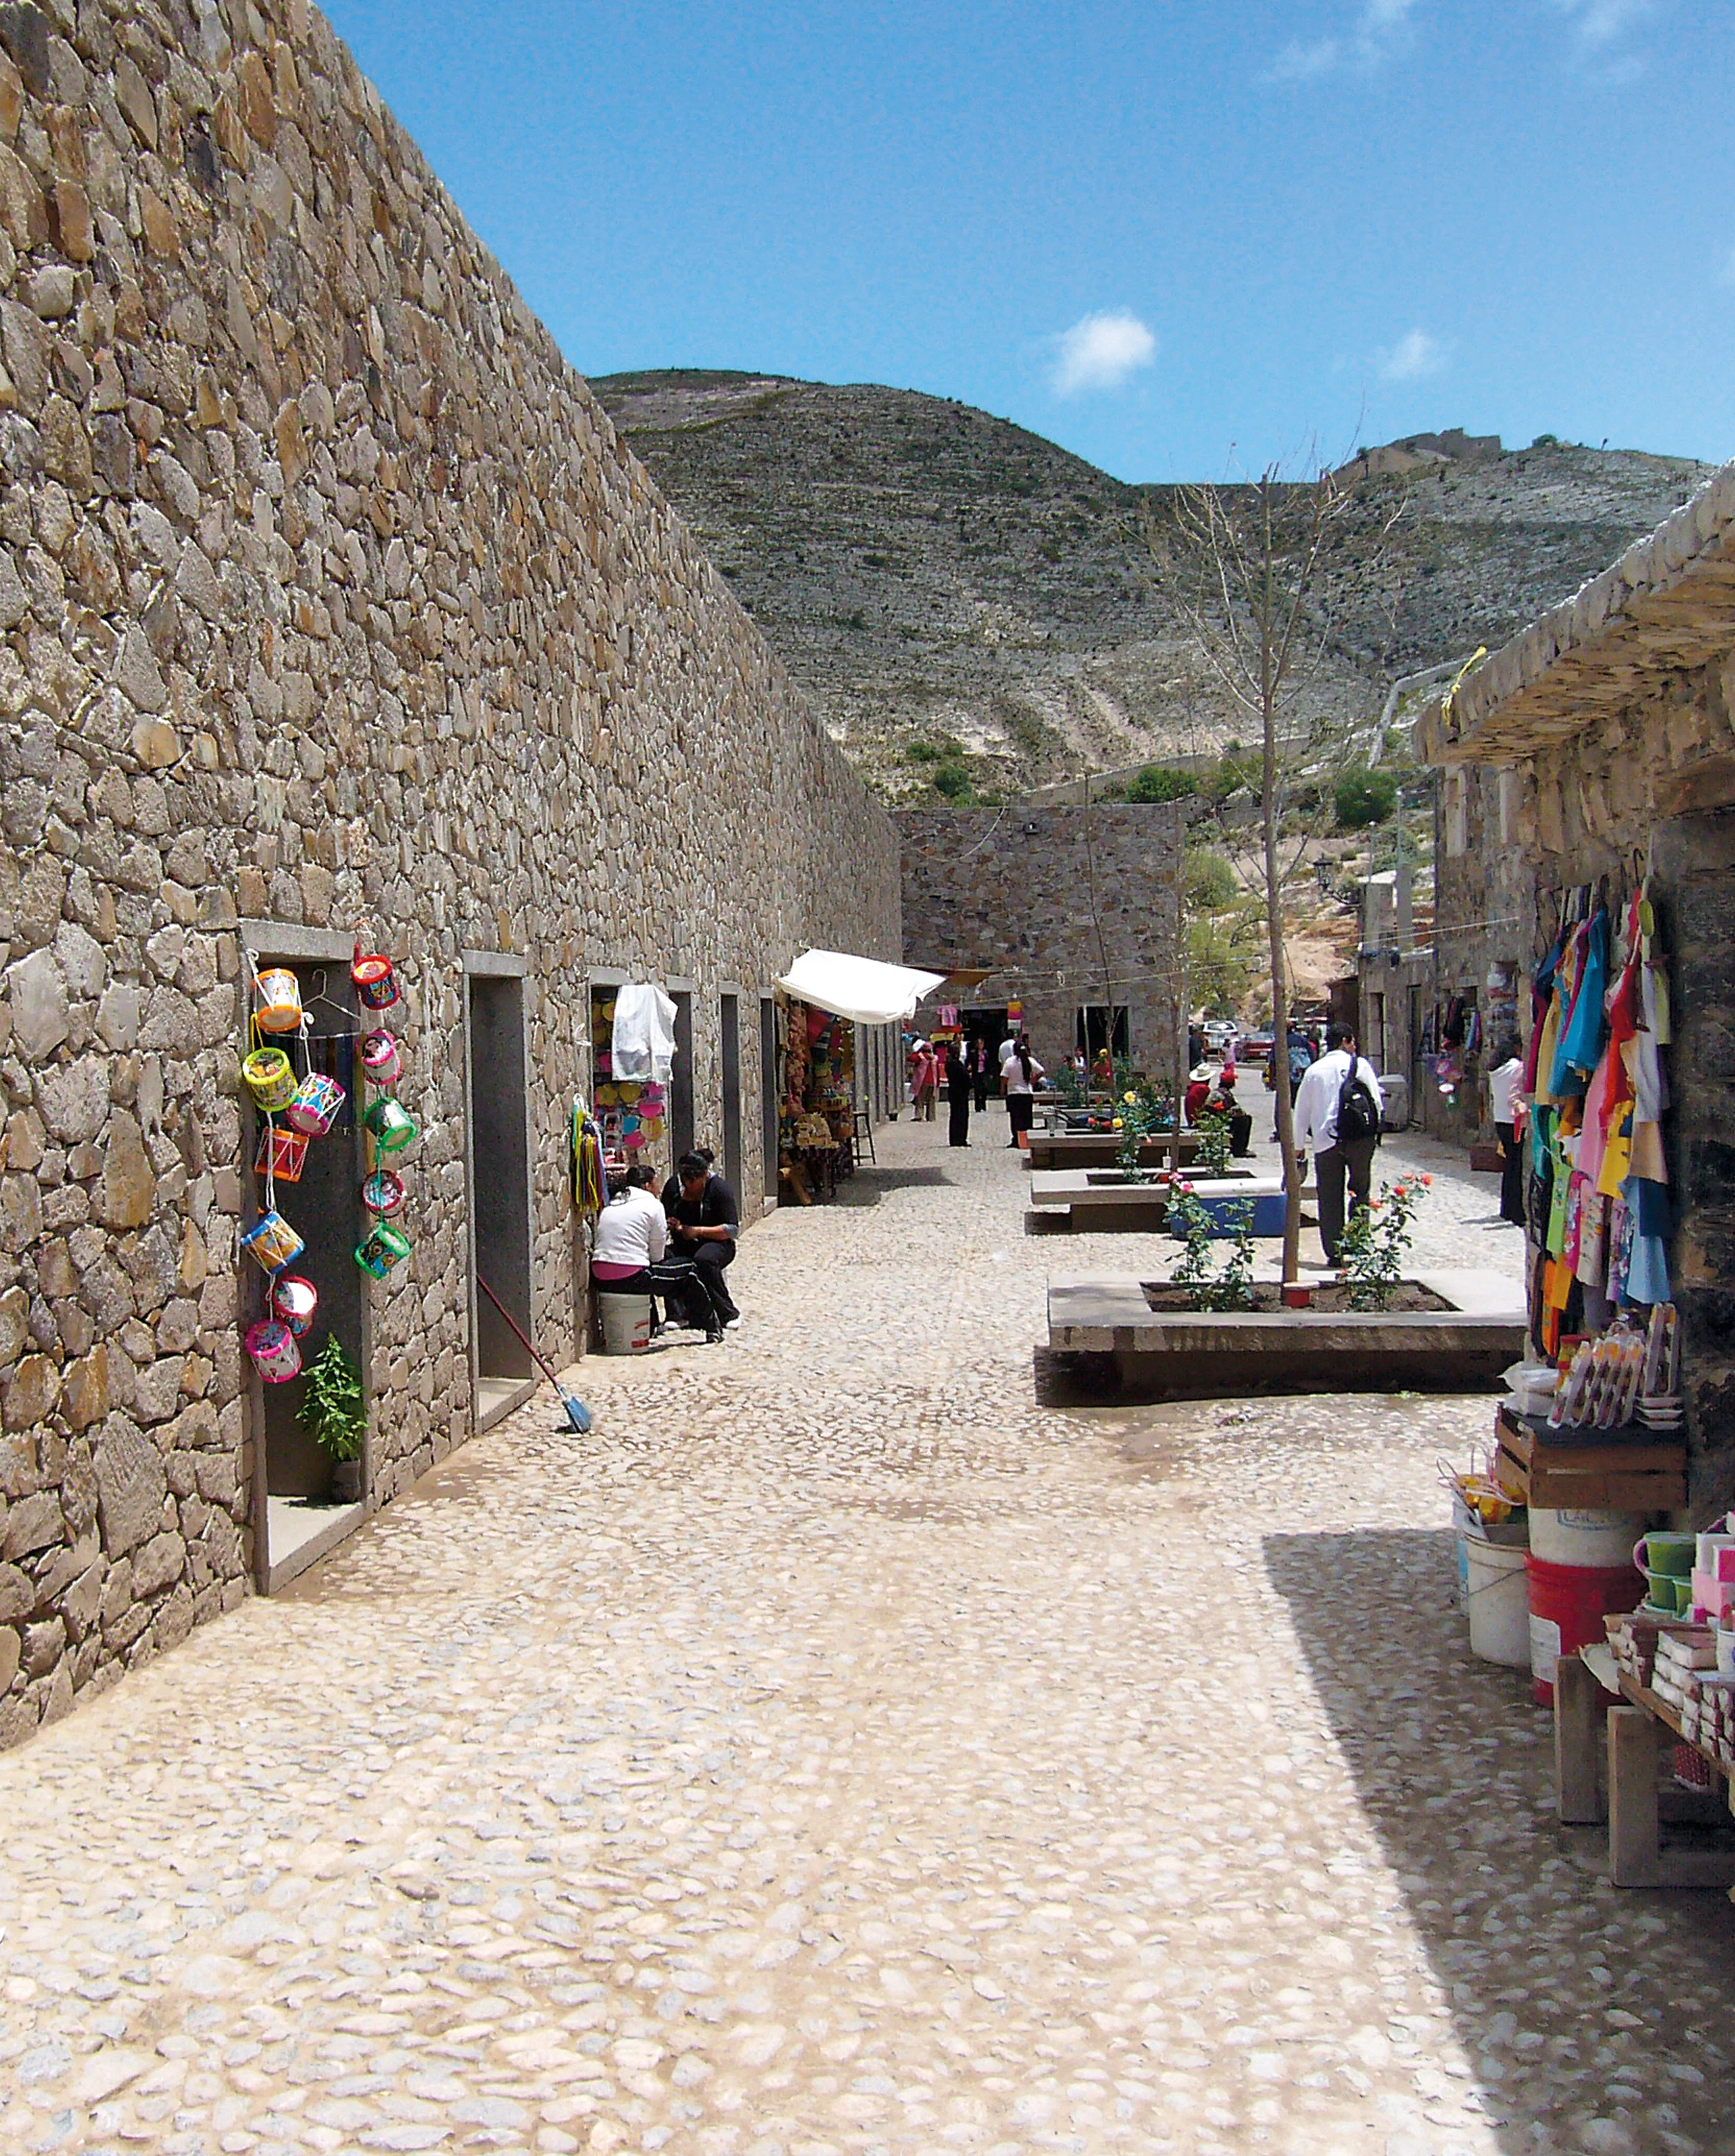 Market Square in Real de Catorce